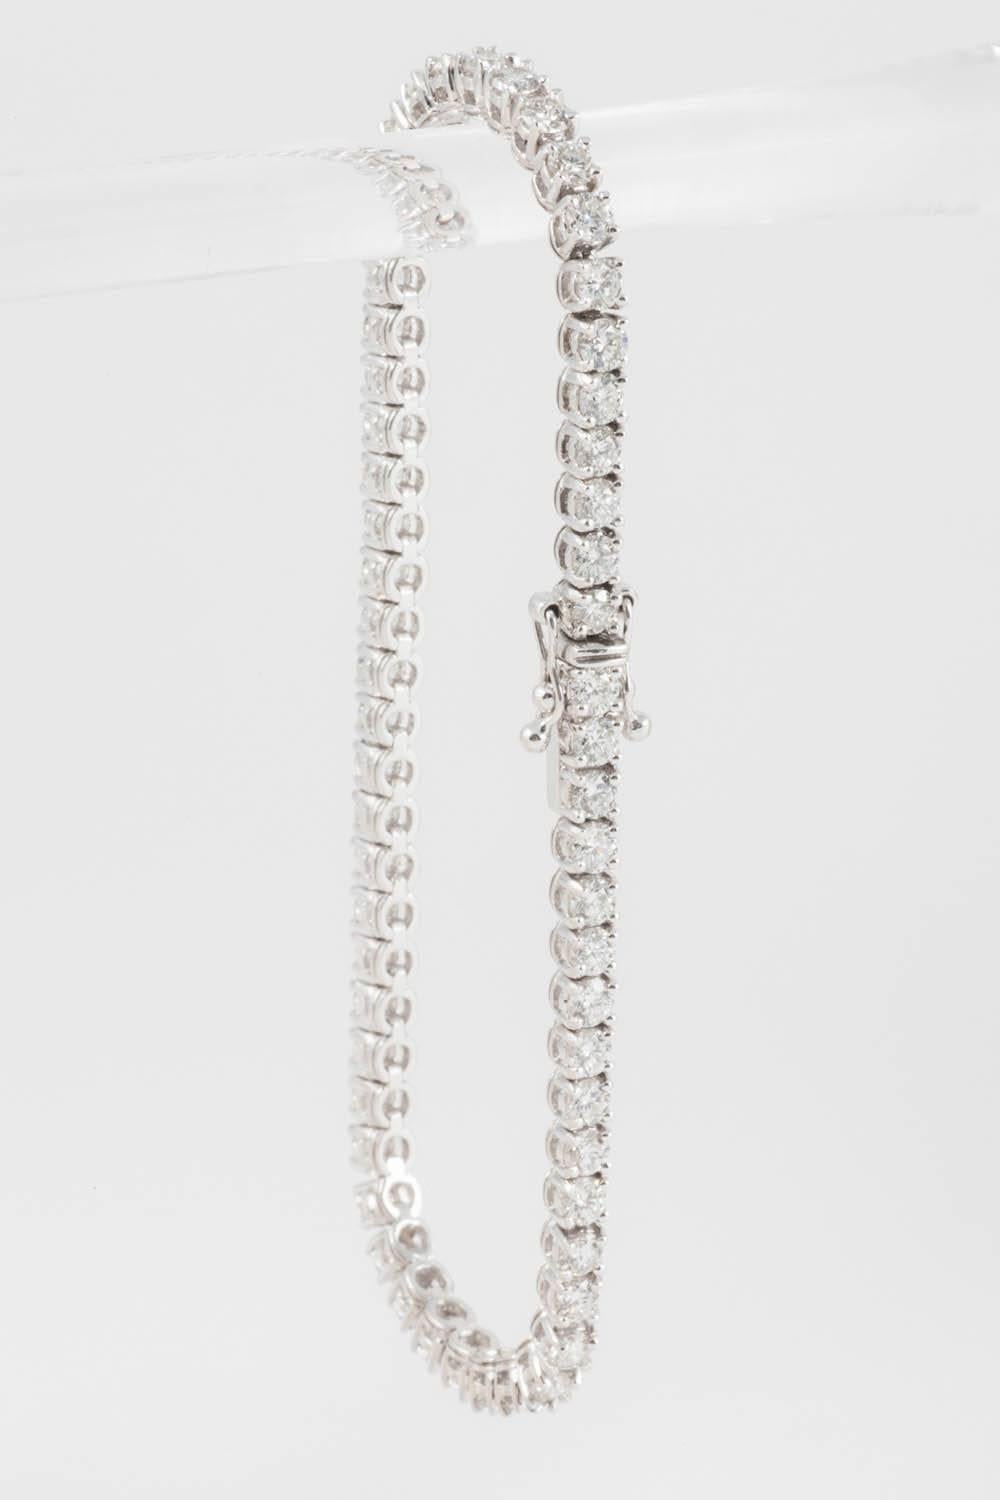 A classic diamond line bracelet composed of approximately 5.85 carats of Premium cut round brilliant cut diamonds set to a classic 4 claw mounting in 18ct white gold. The diamonds are all finely cut and are of "G" Rare White + colour and